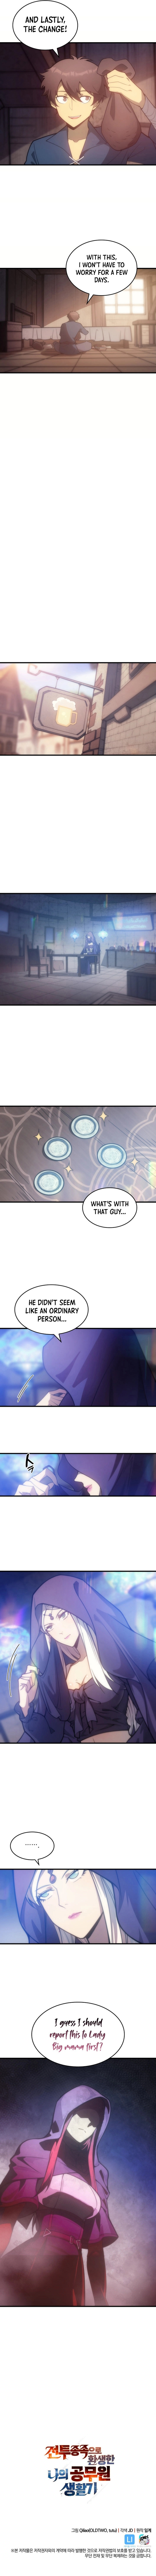 My Civil Servant Life Reborn in the Strange World - Chapter 6 Page 8